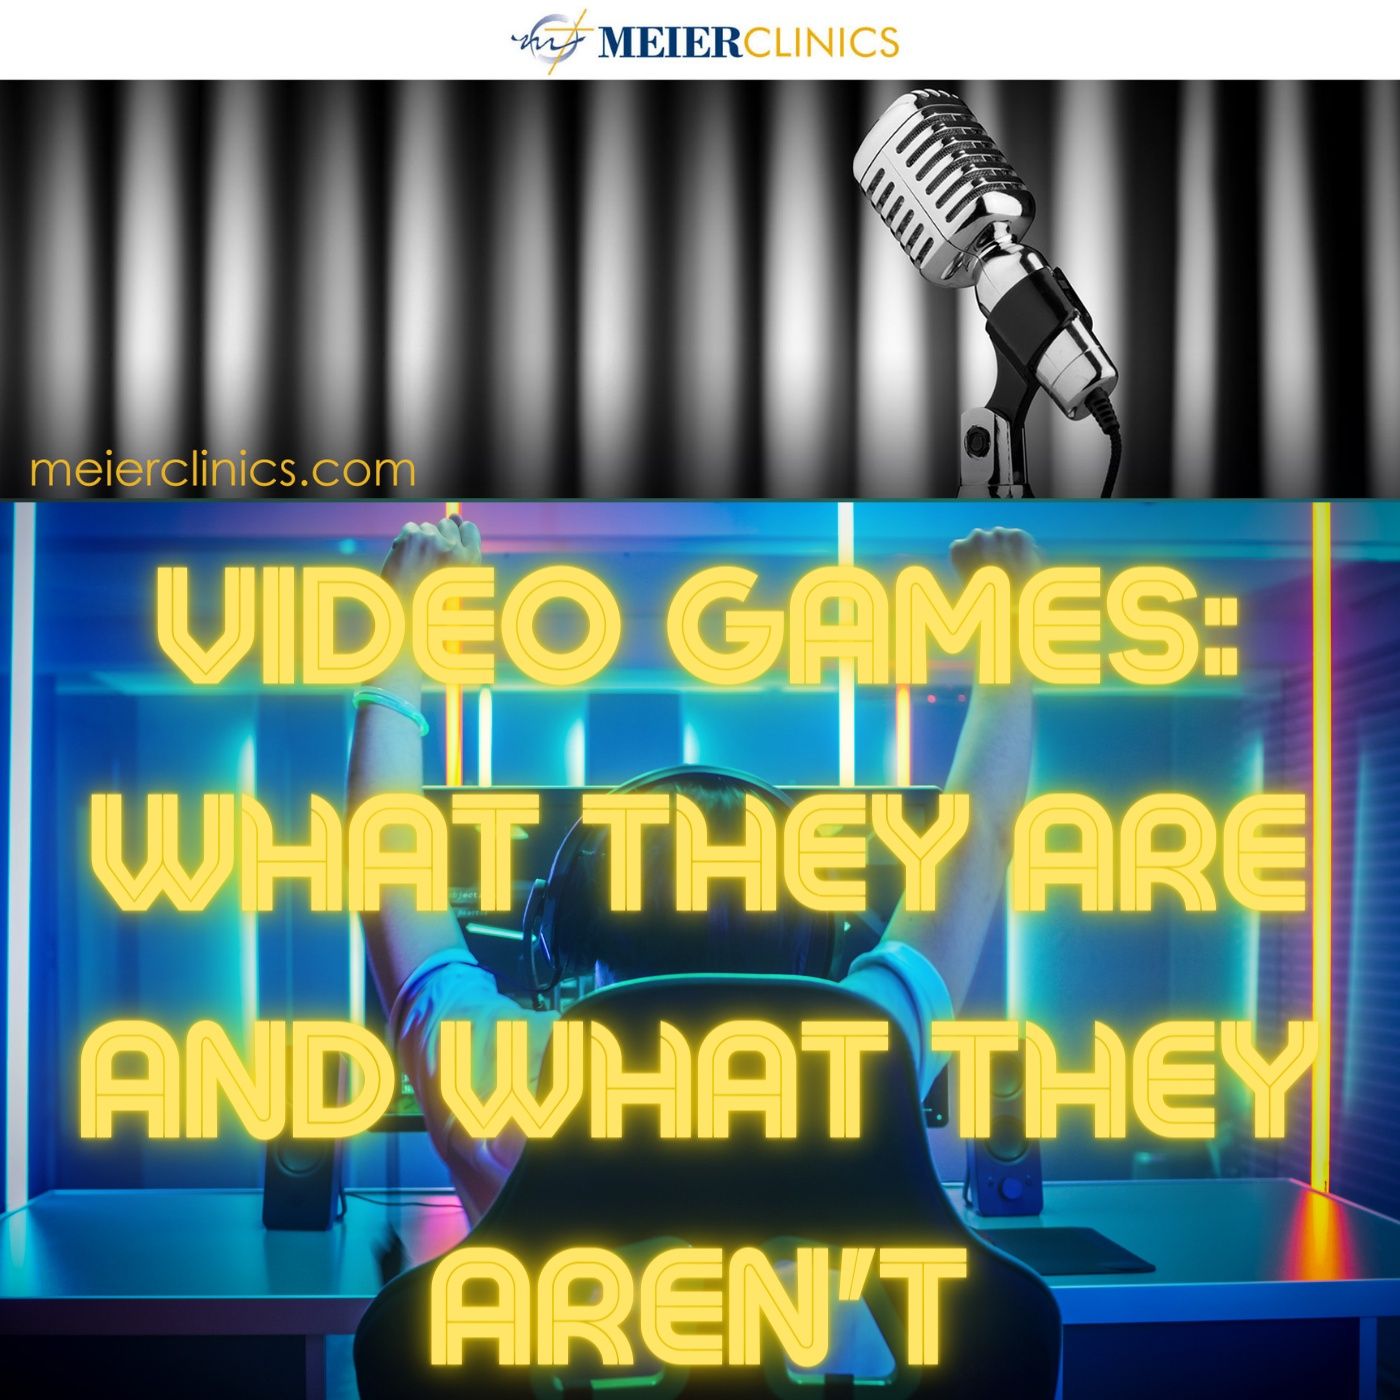 Video Games: What They Are And What They Aren't